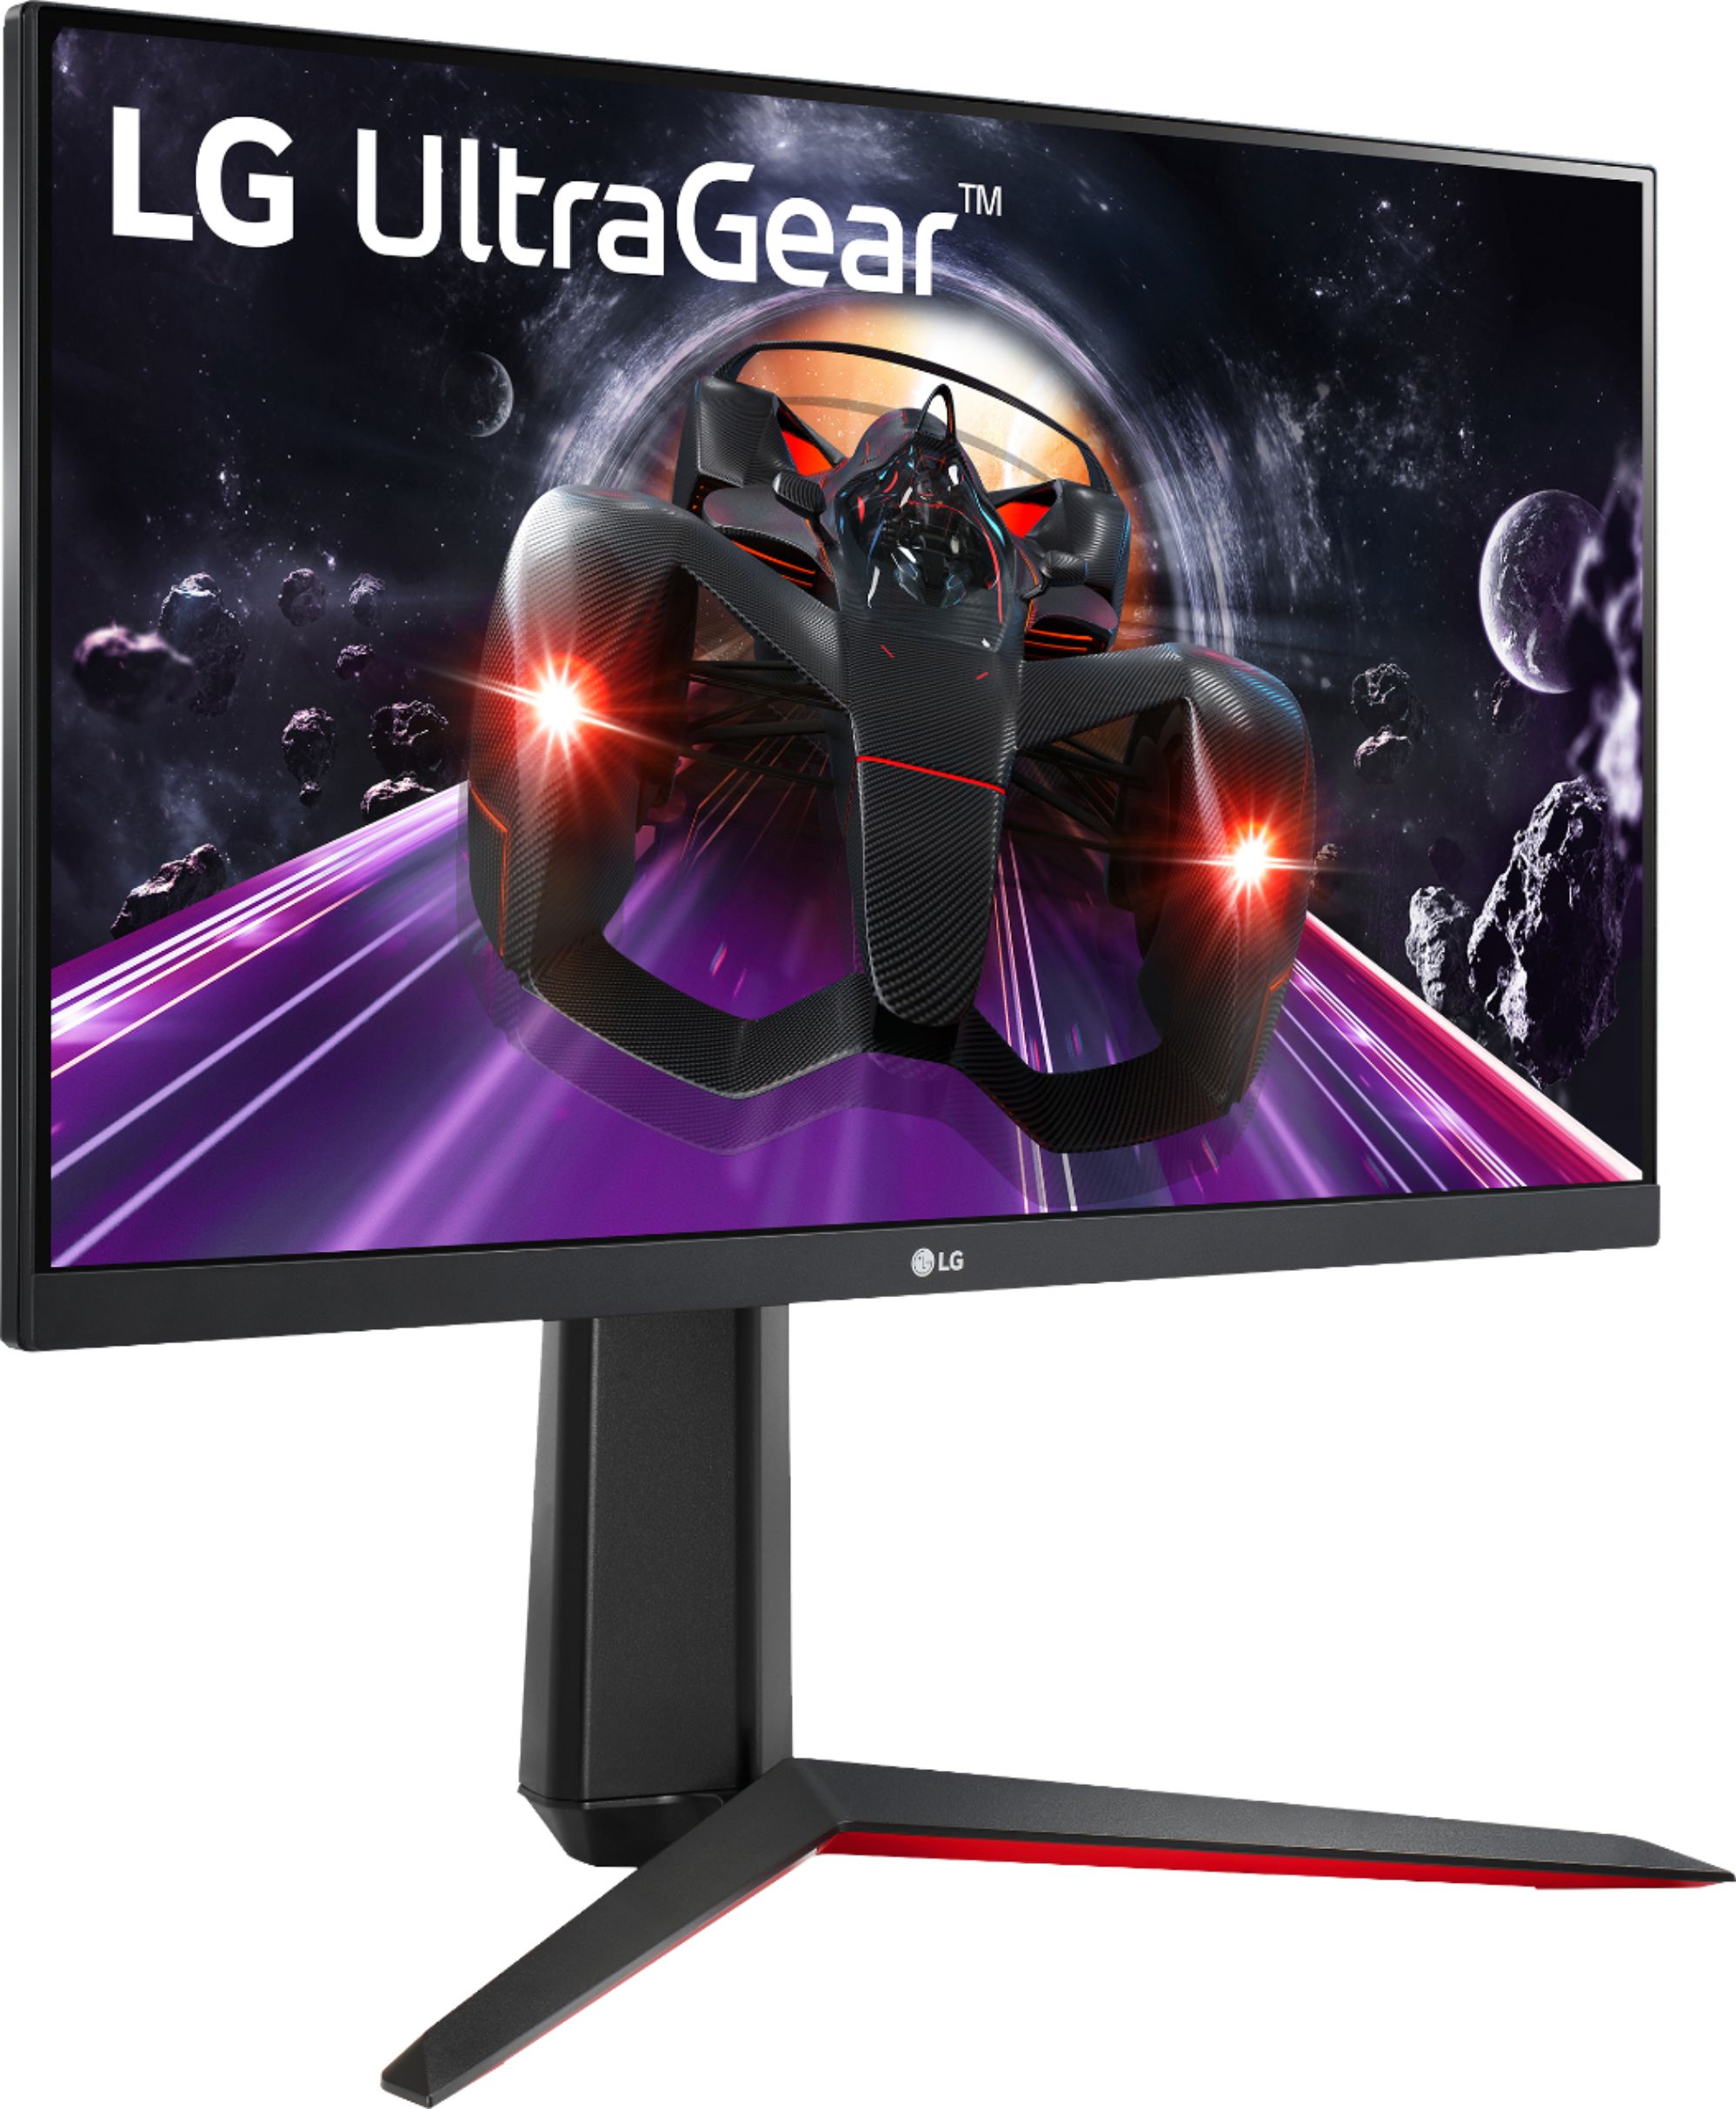 Angle View: LG - Geek Squad Certified Refurbished UltraGear 24" LED FHD FreeSync Monitor with HDR